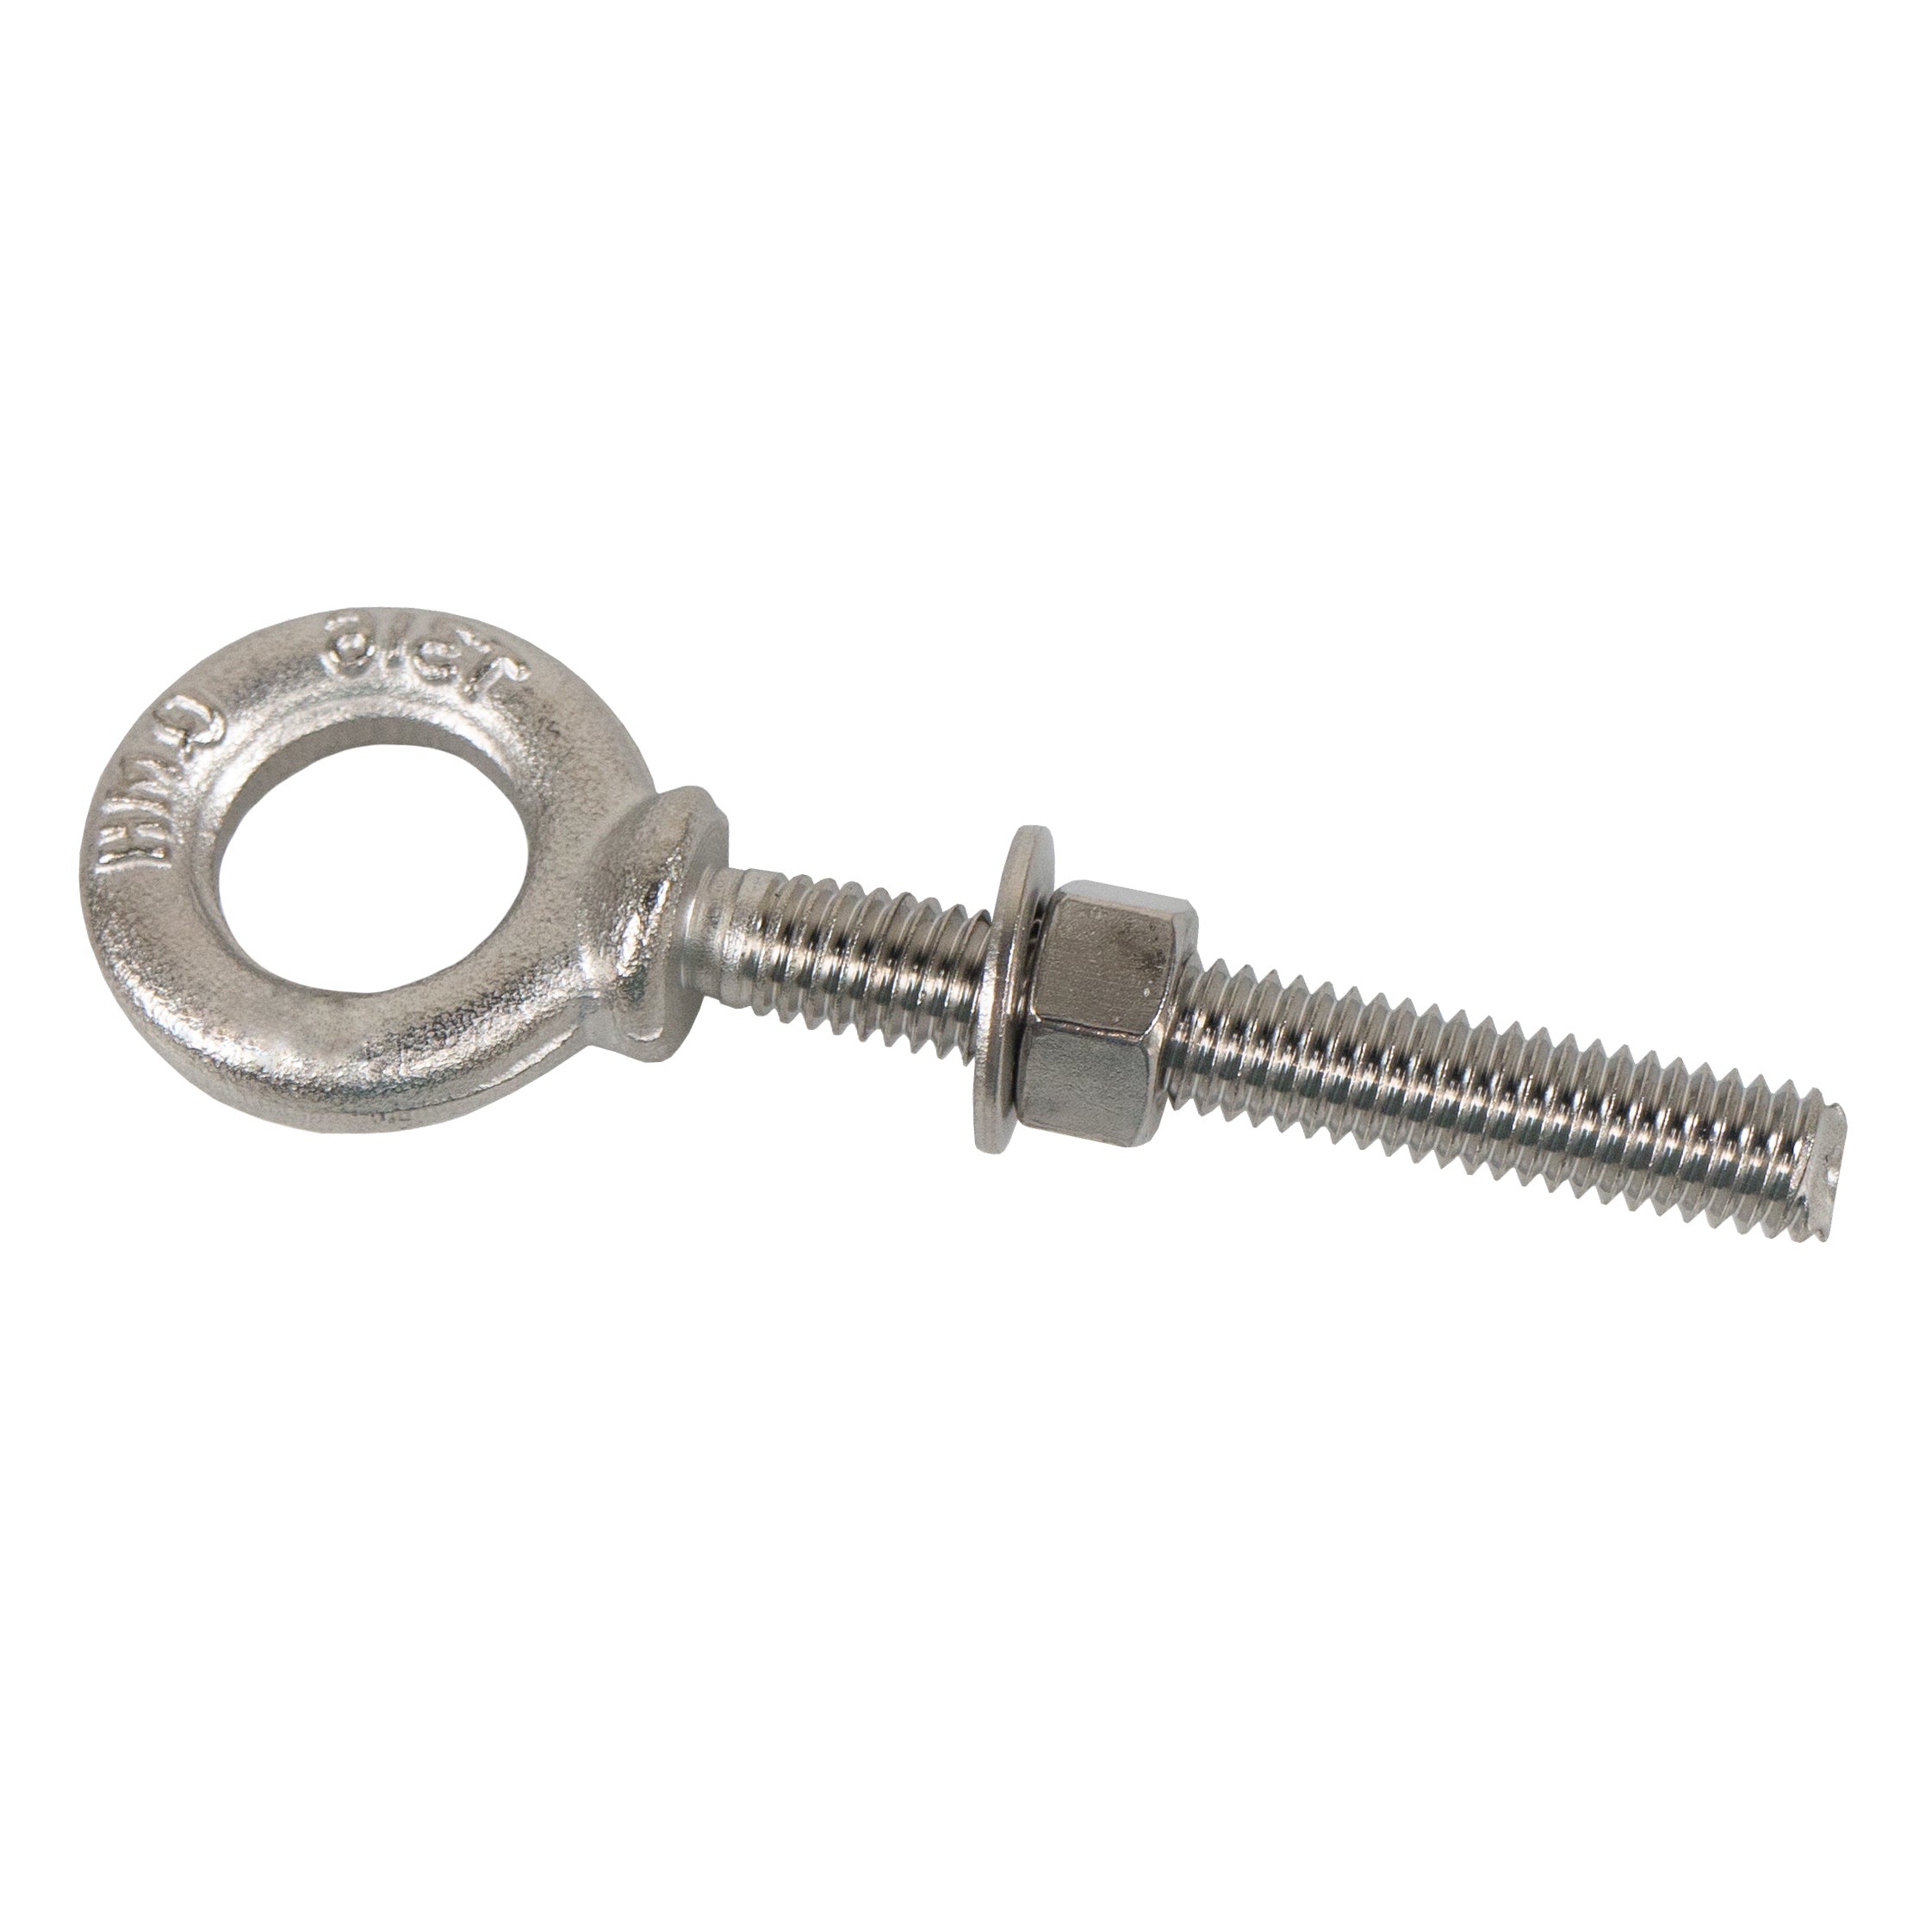 Forged Shoulder Eye Bolts Stainless Steel, 5/8